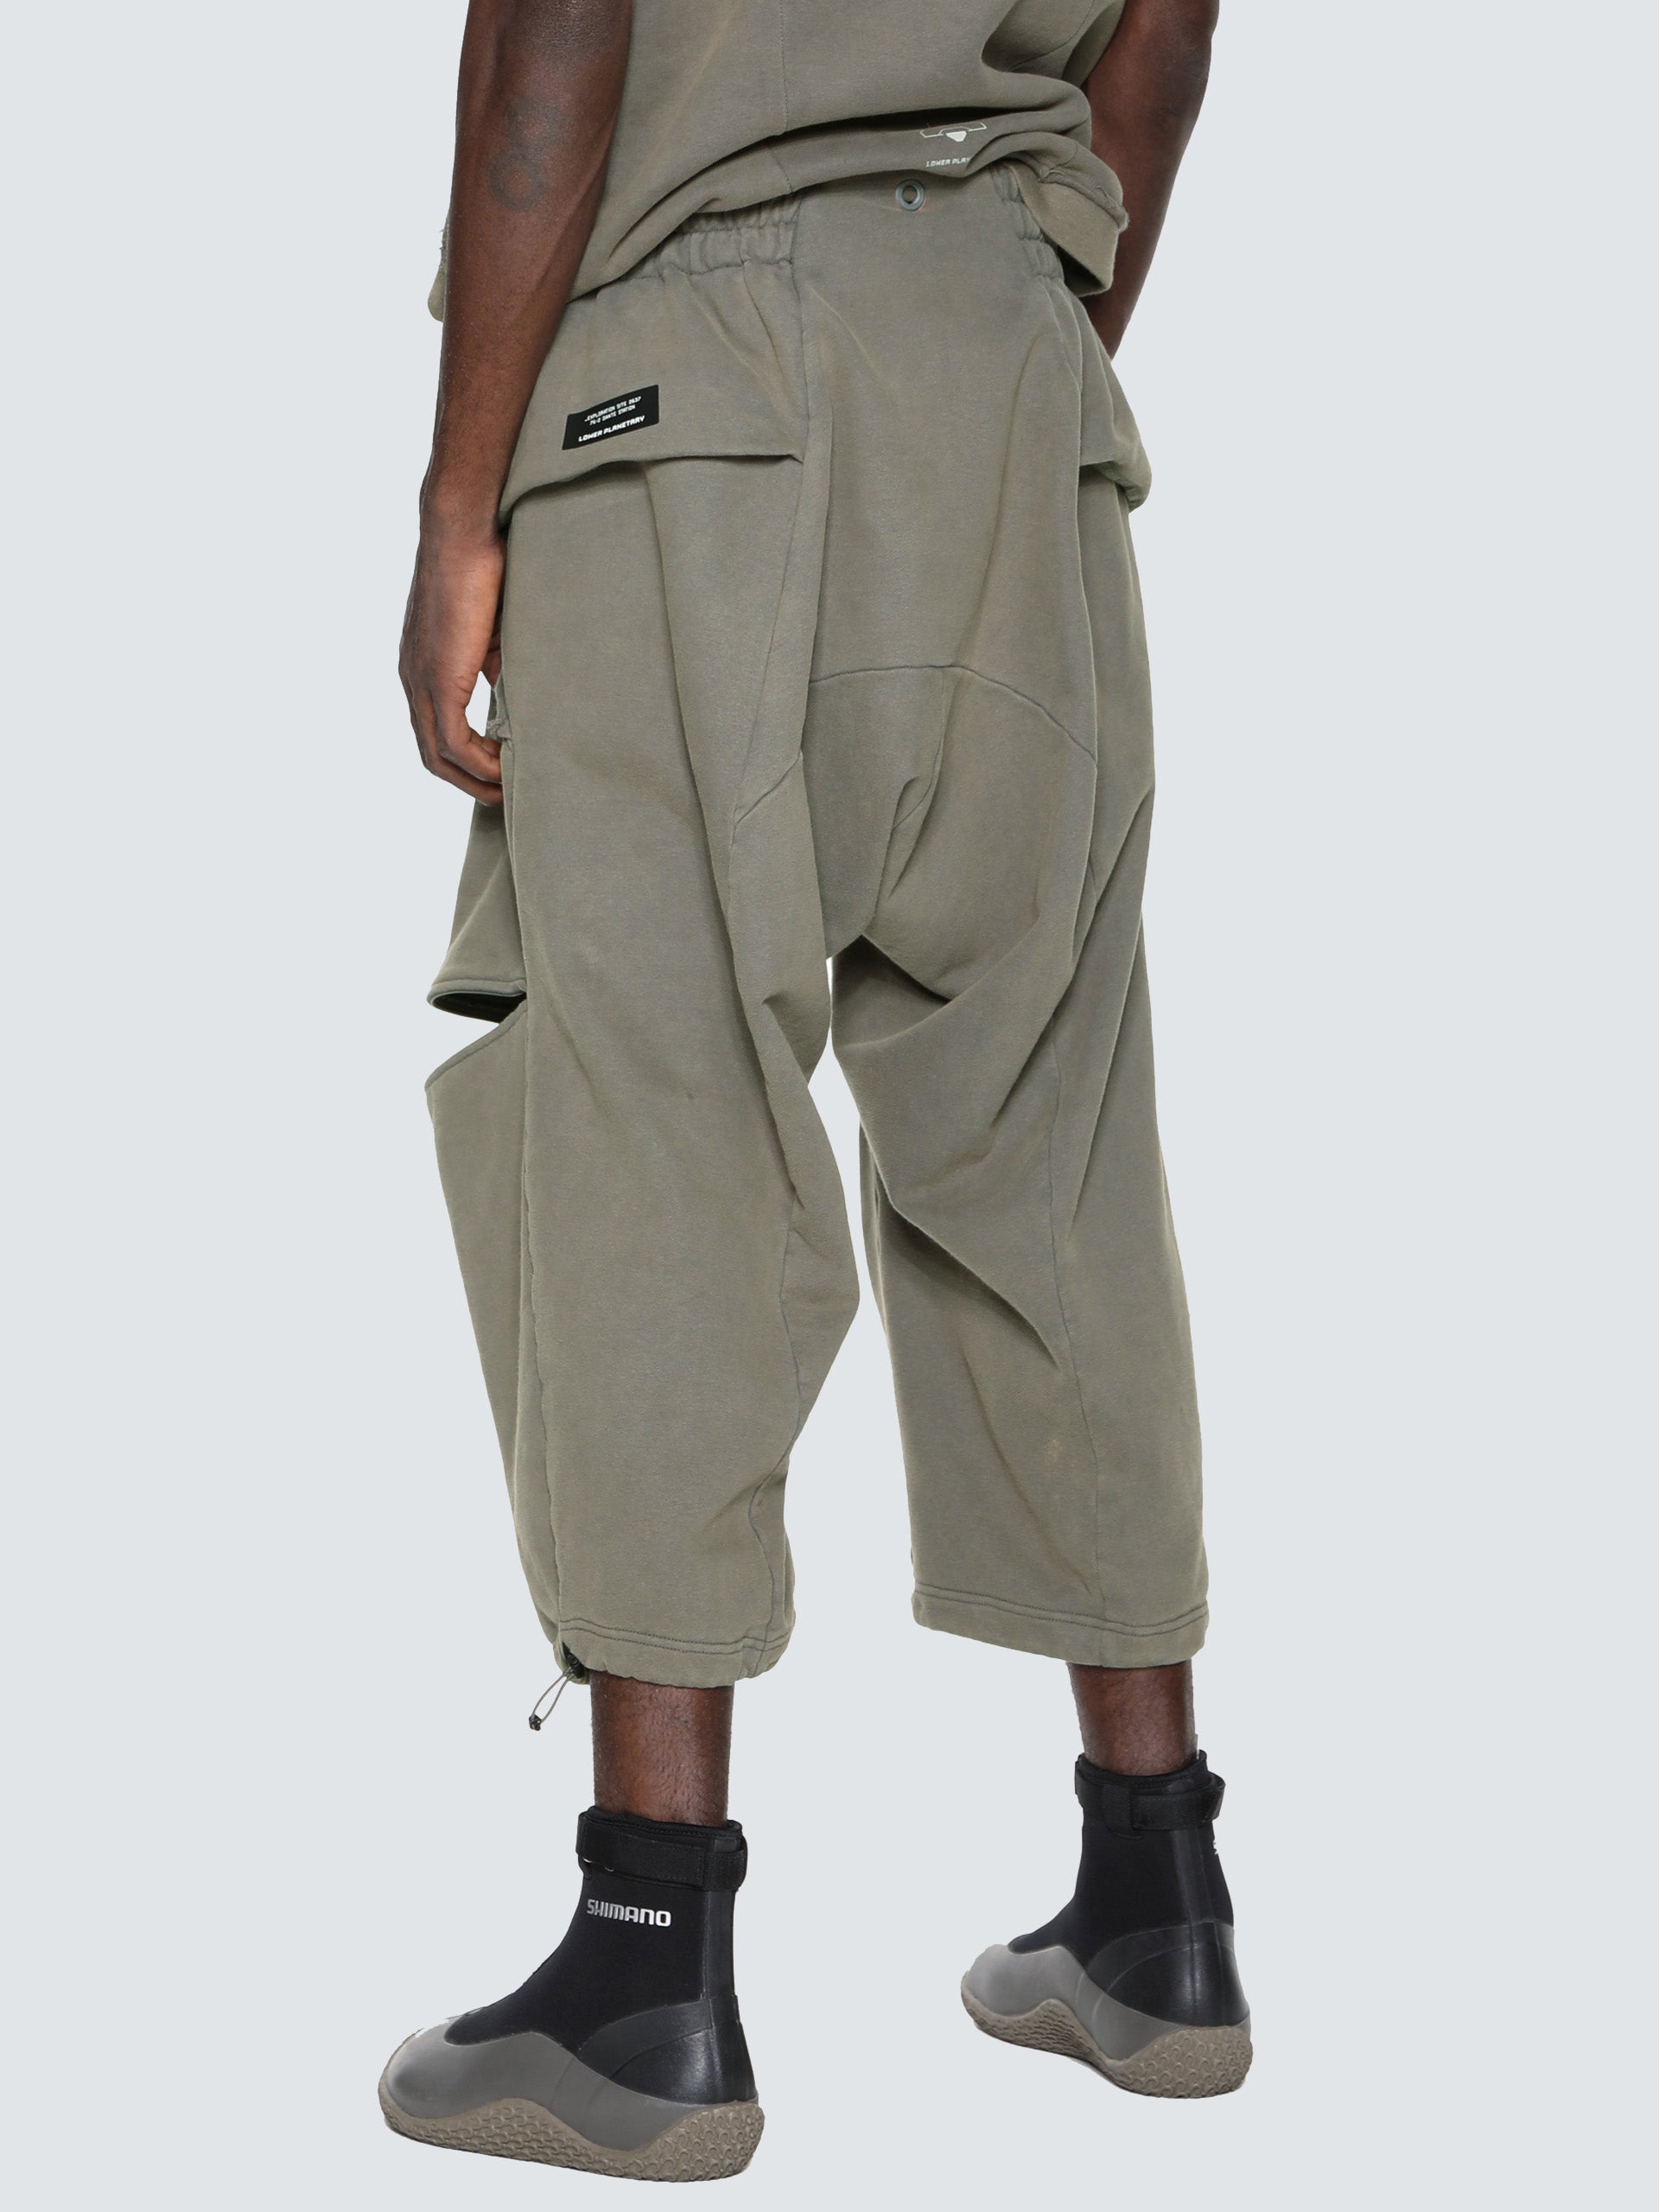 AMiERY Simple Lounge Pants Hit So Many No. 1 Marks on